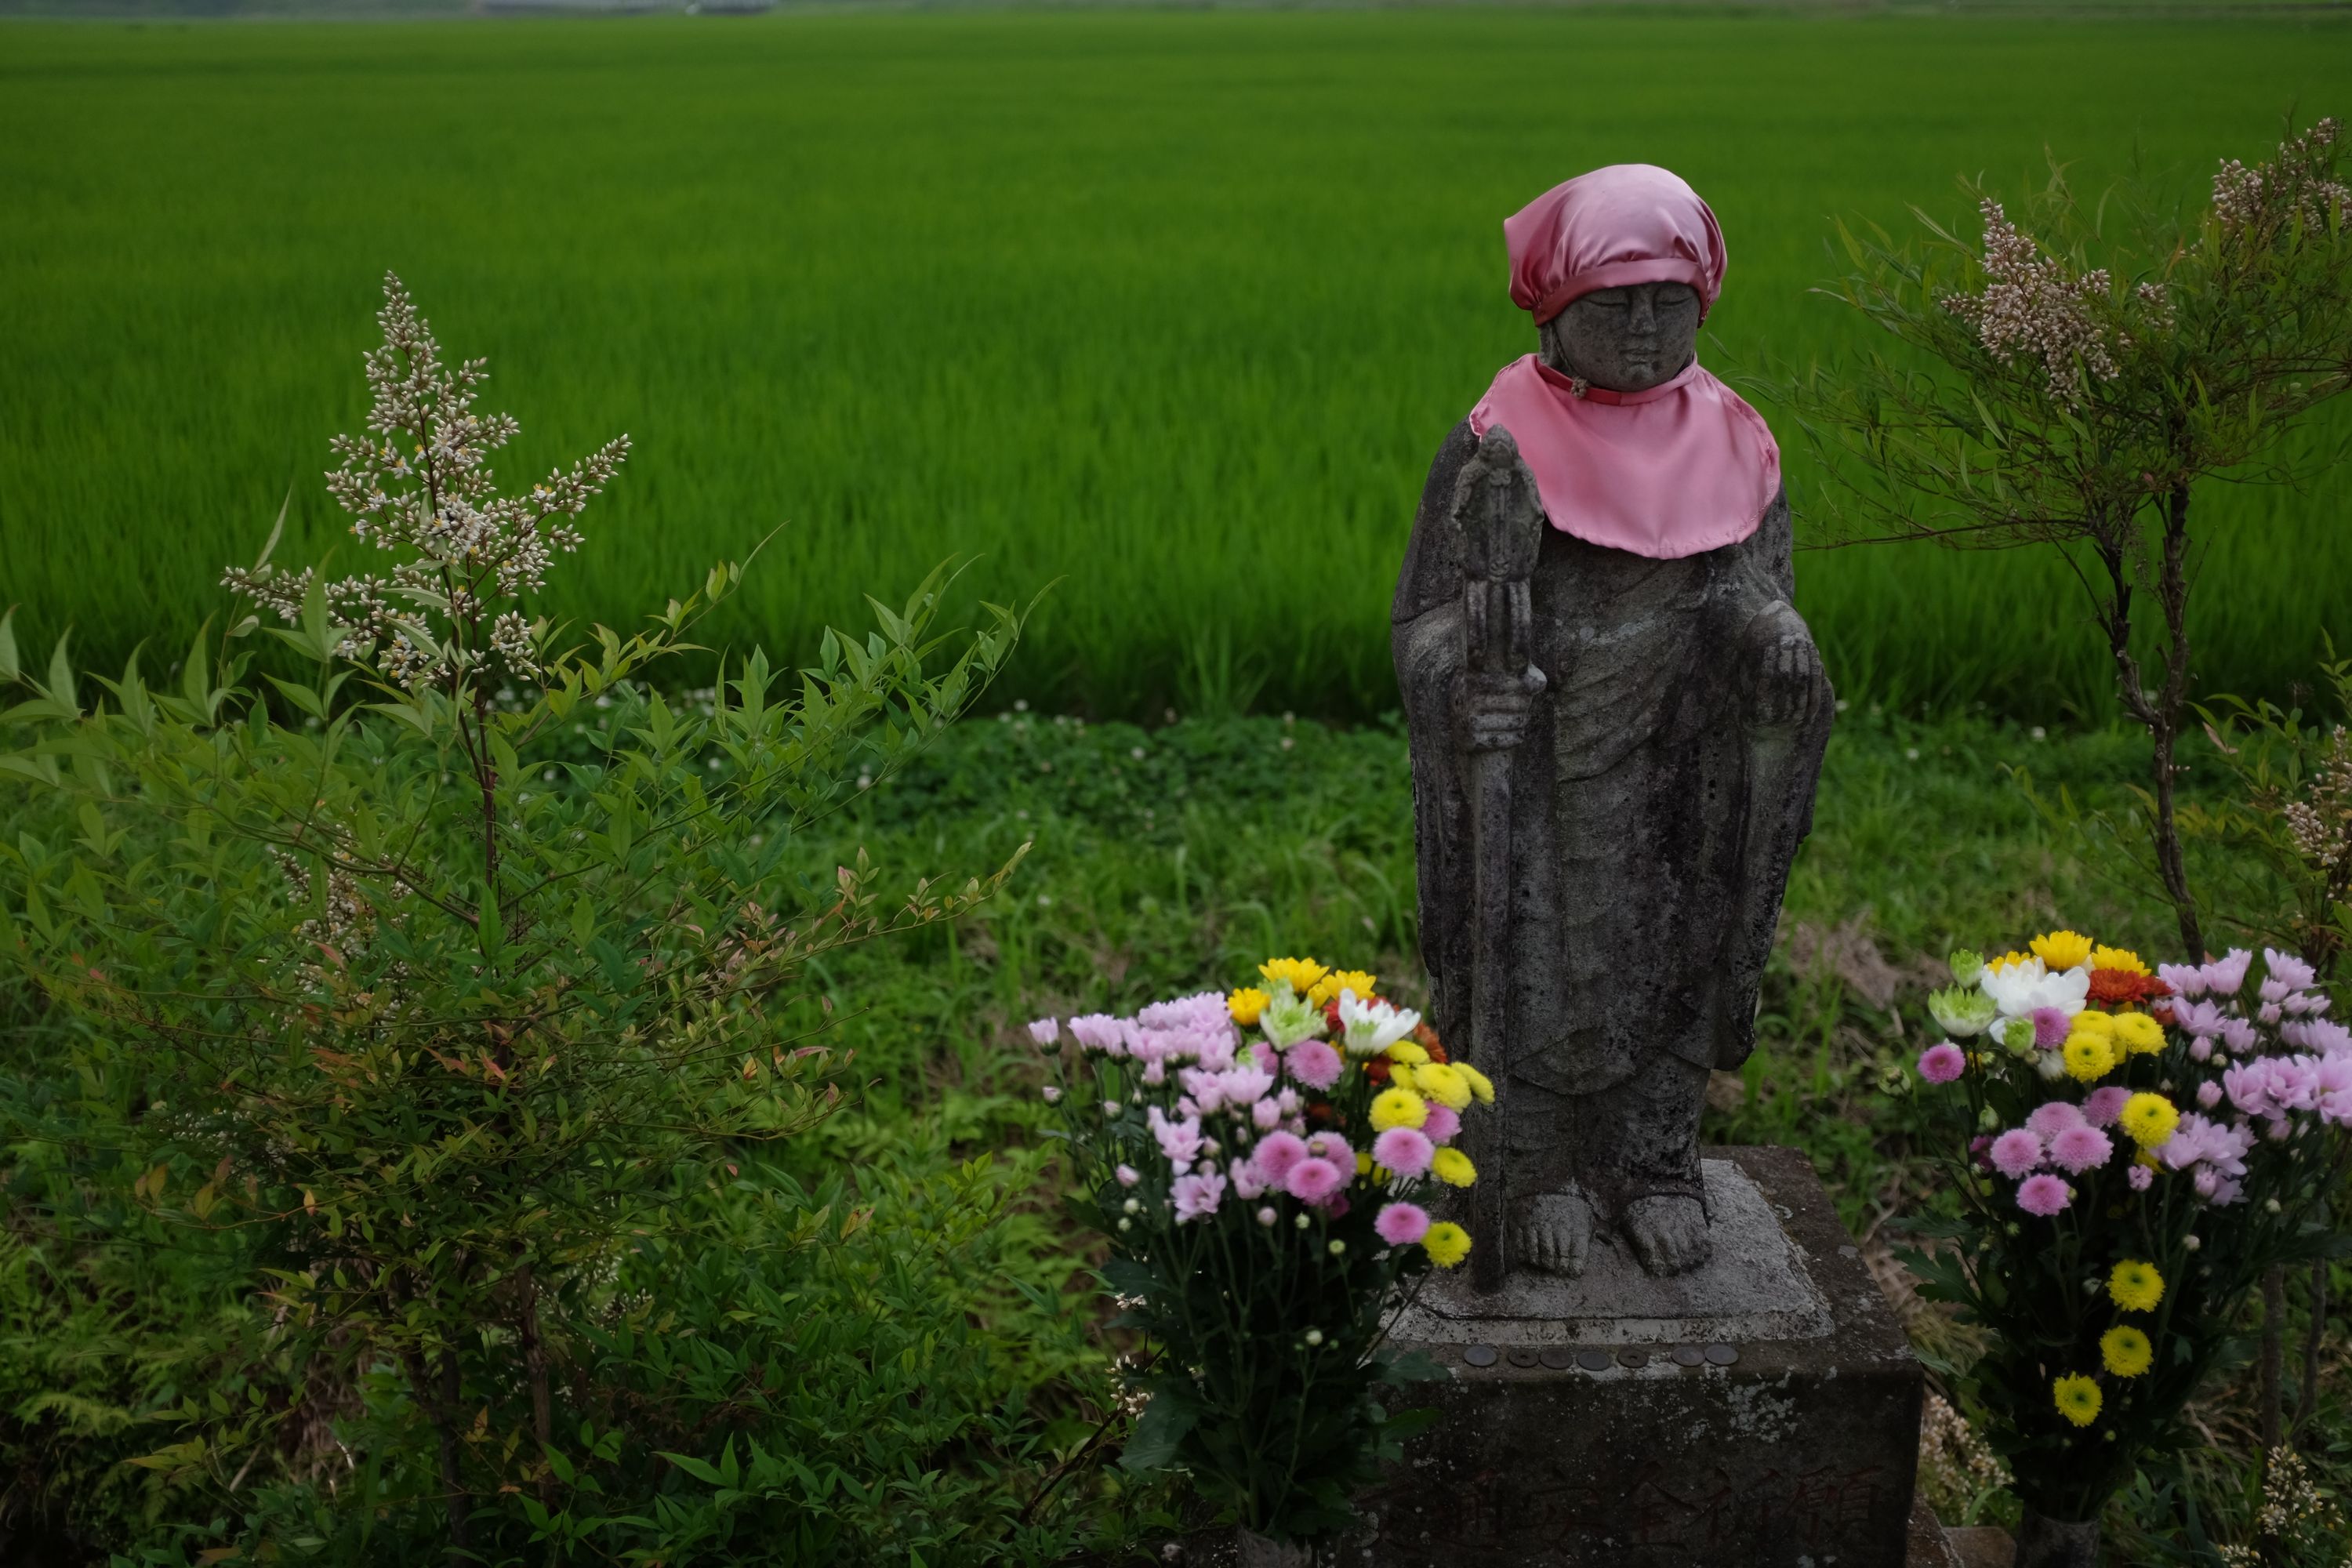 A statue of a guardian wearing a cape and a hat stands in front of a brilliant green rice field.